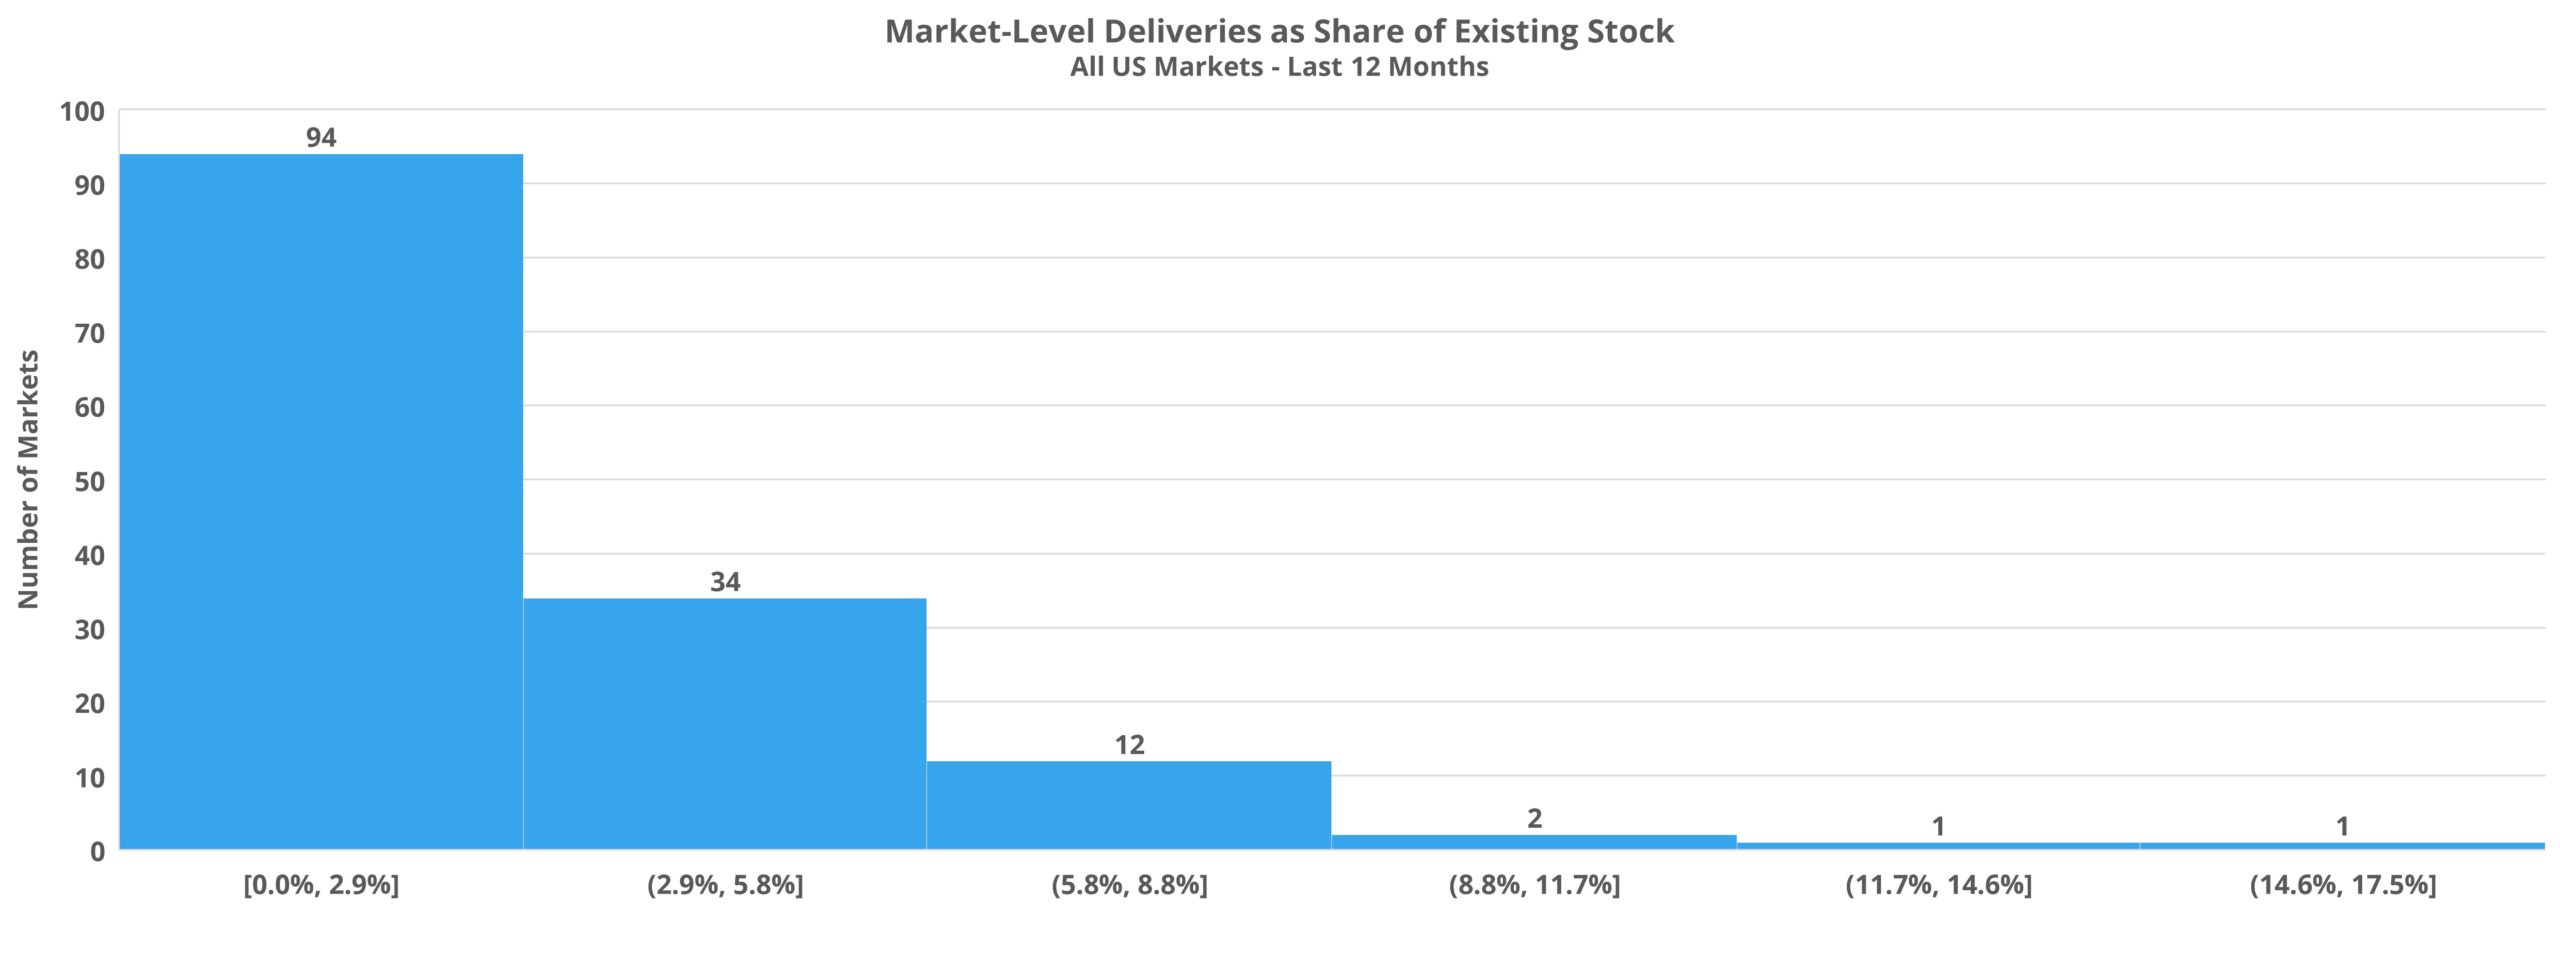 Market-Level Deliveries as Share of Existing Stock